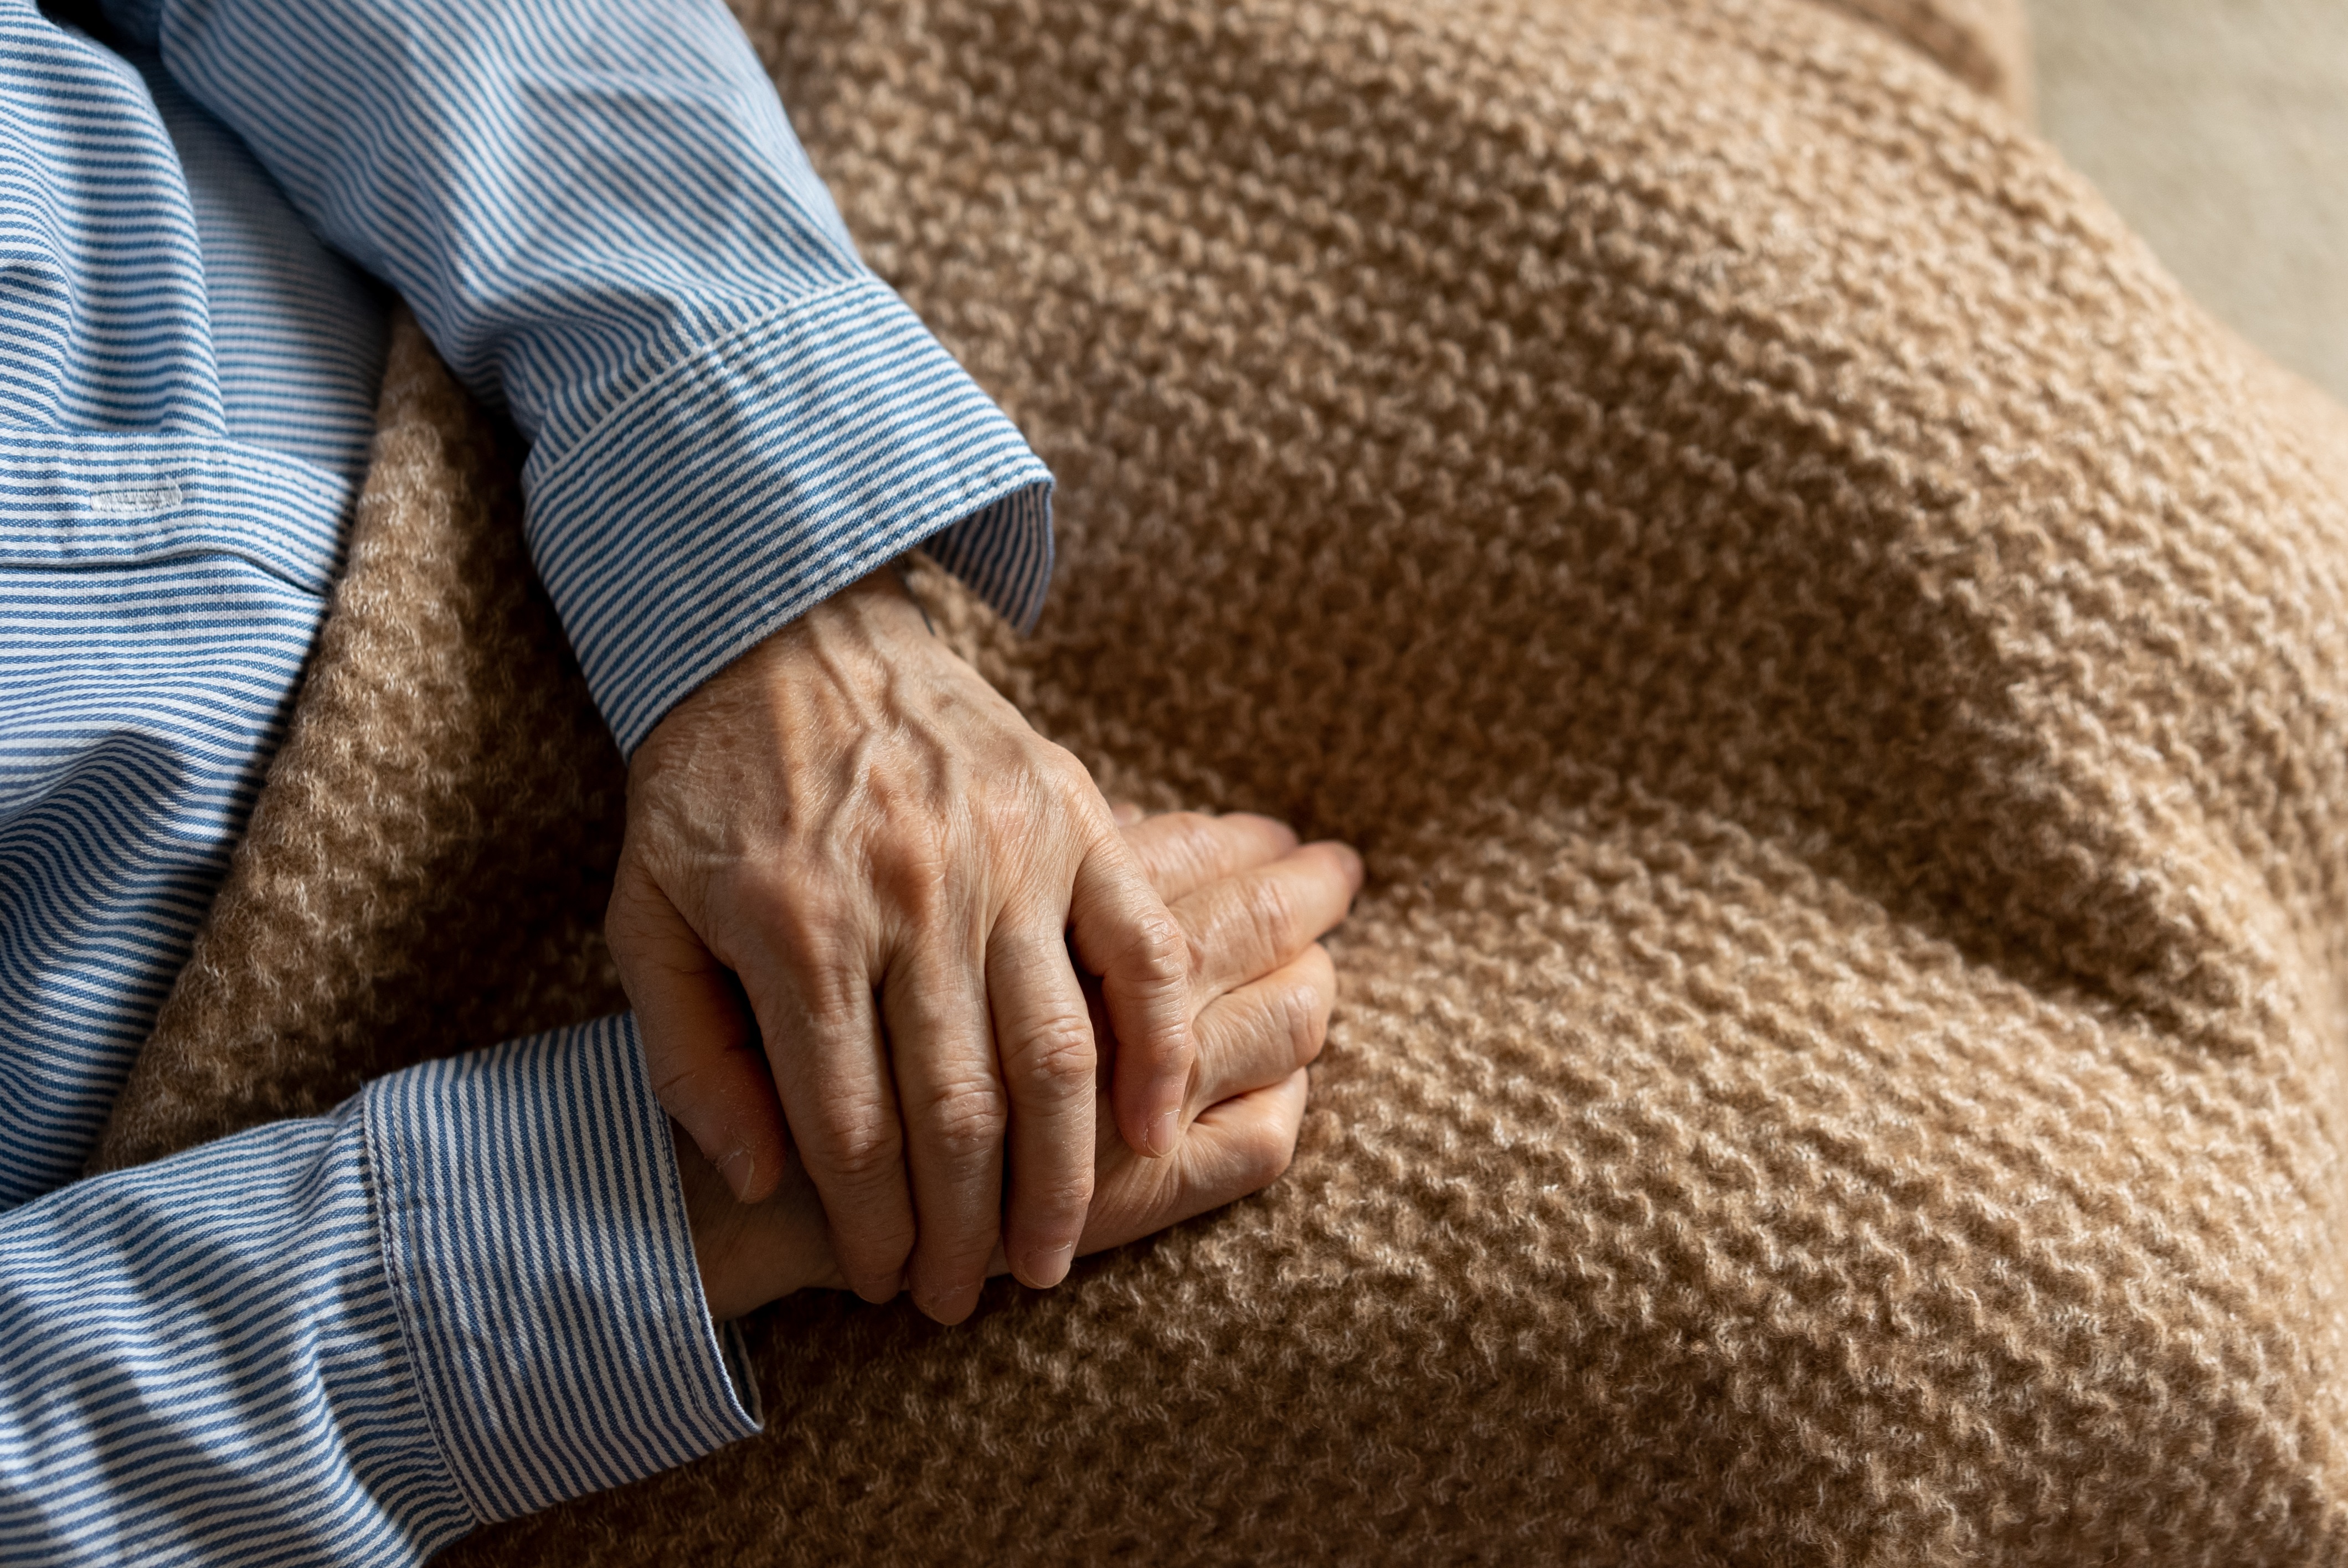 The Truth About Palliative and Hospice Care